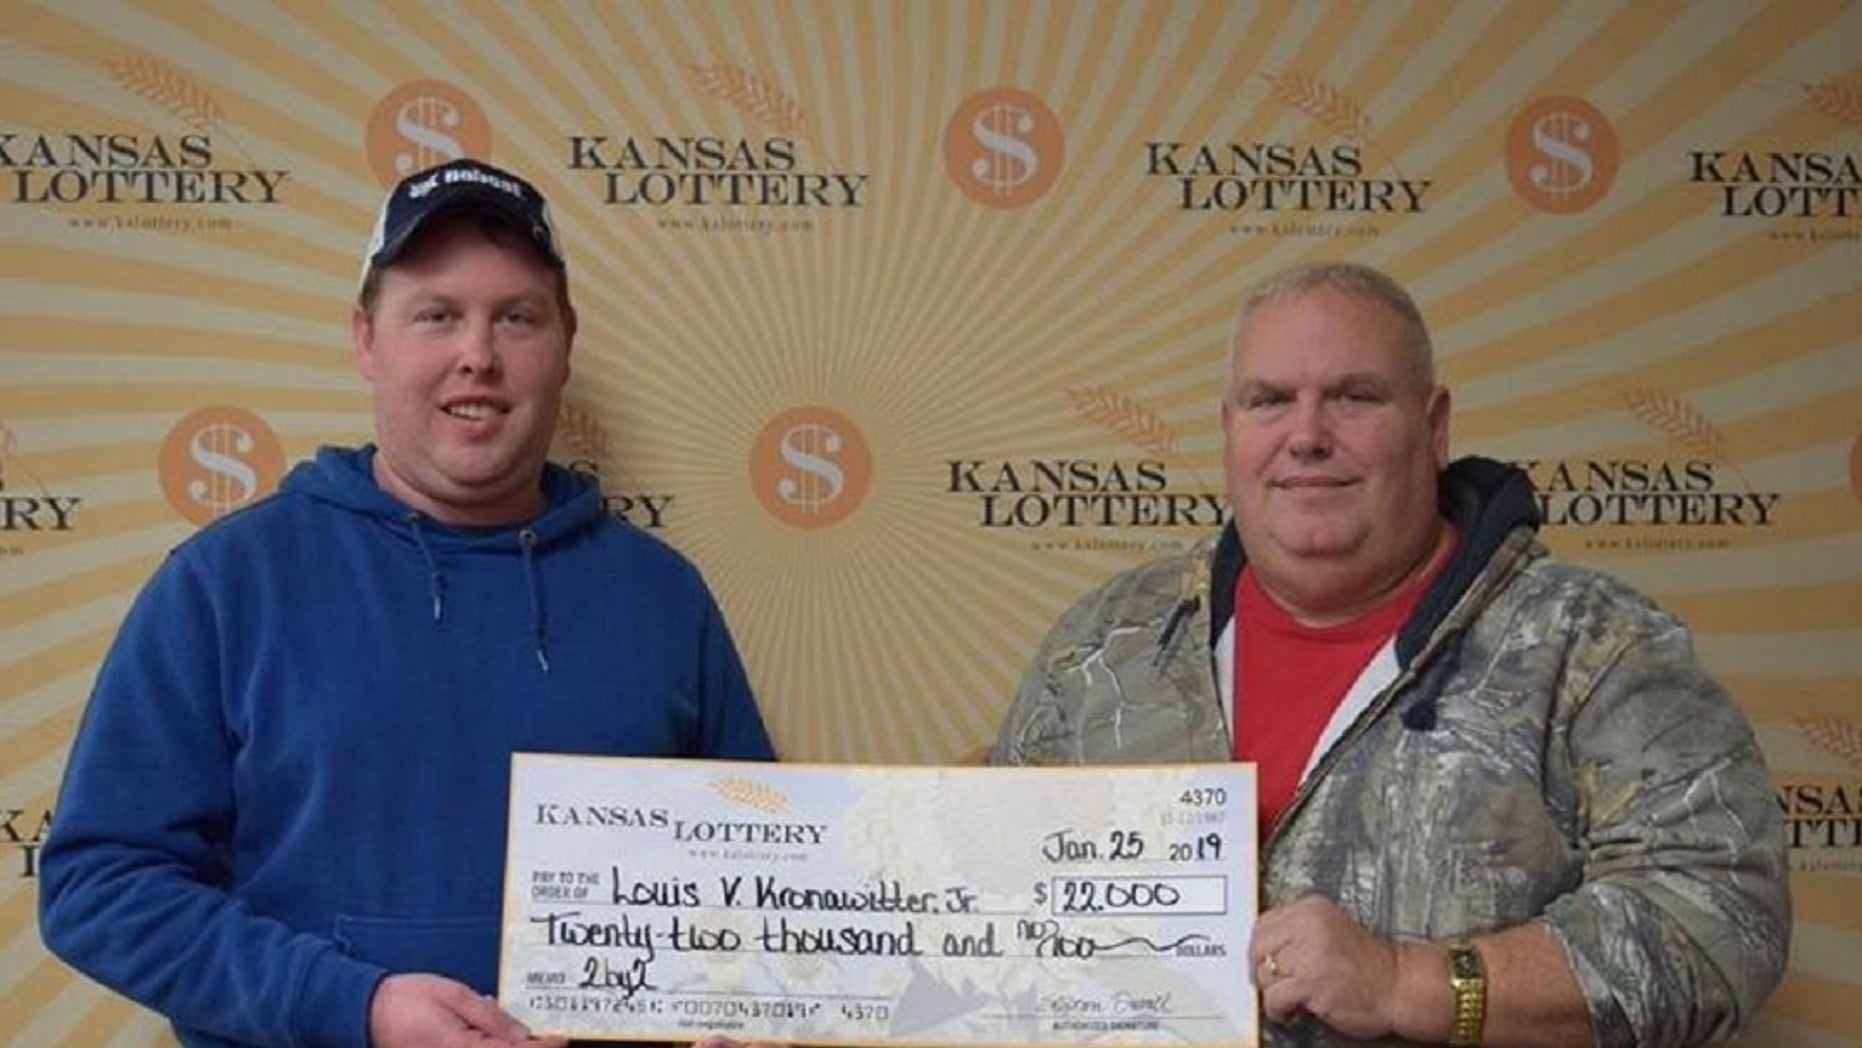 Lottery player wins $22,000 while arguing with spouse over his spending on tickets